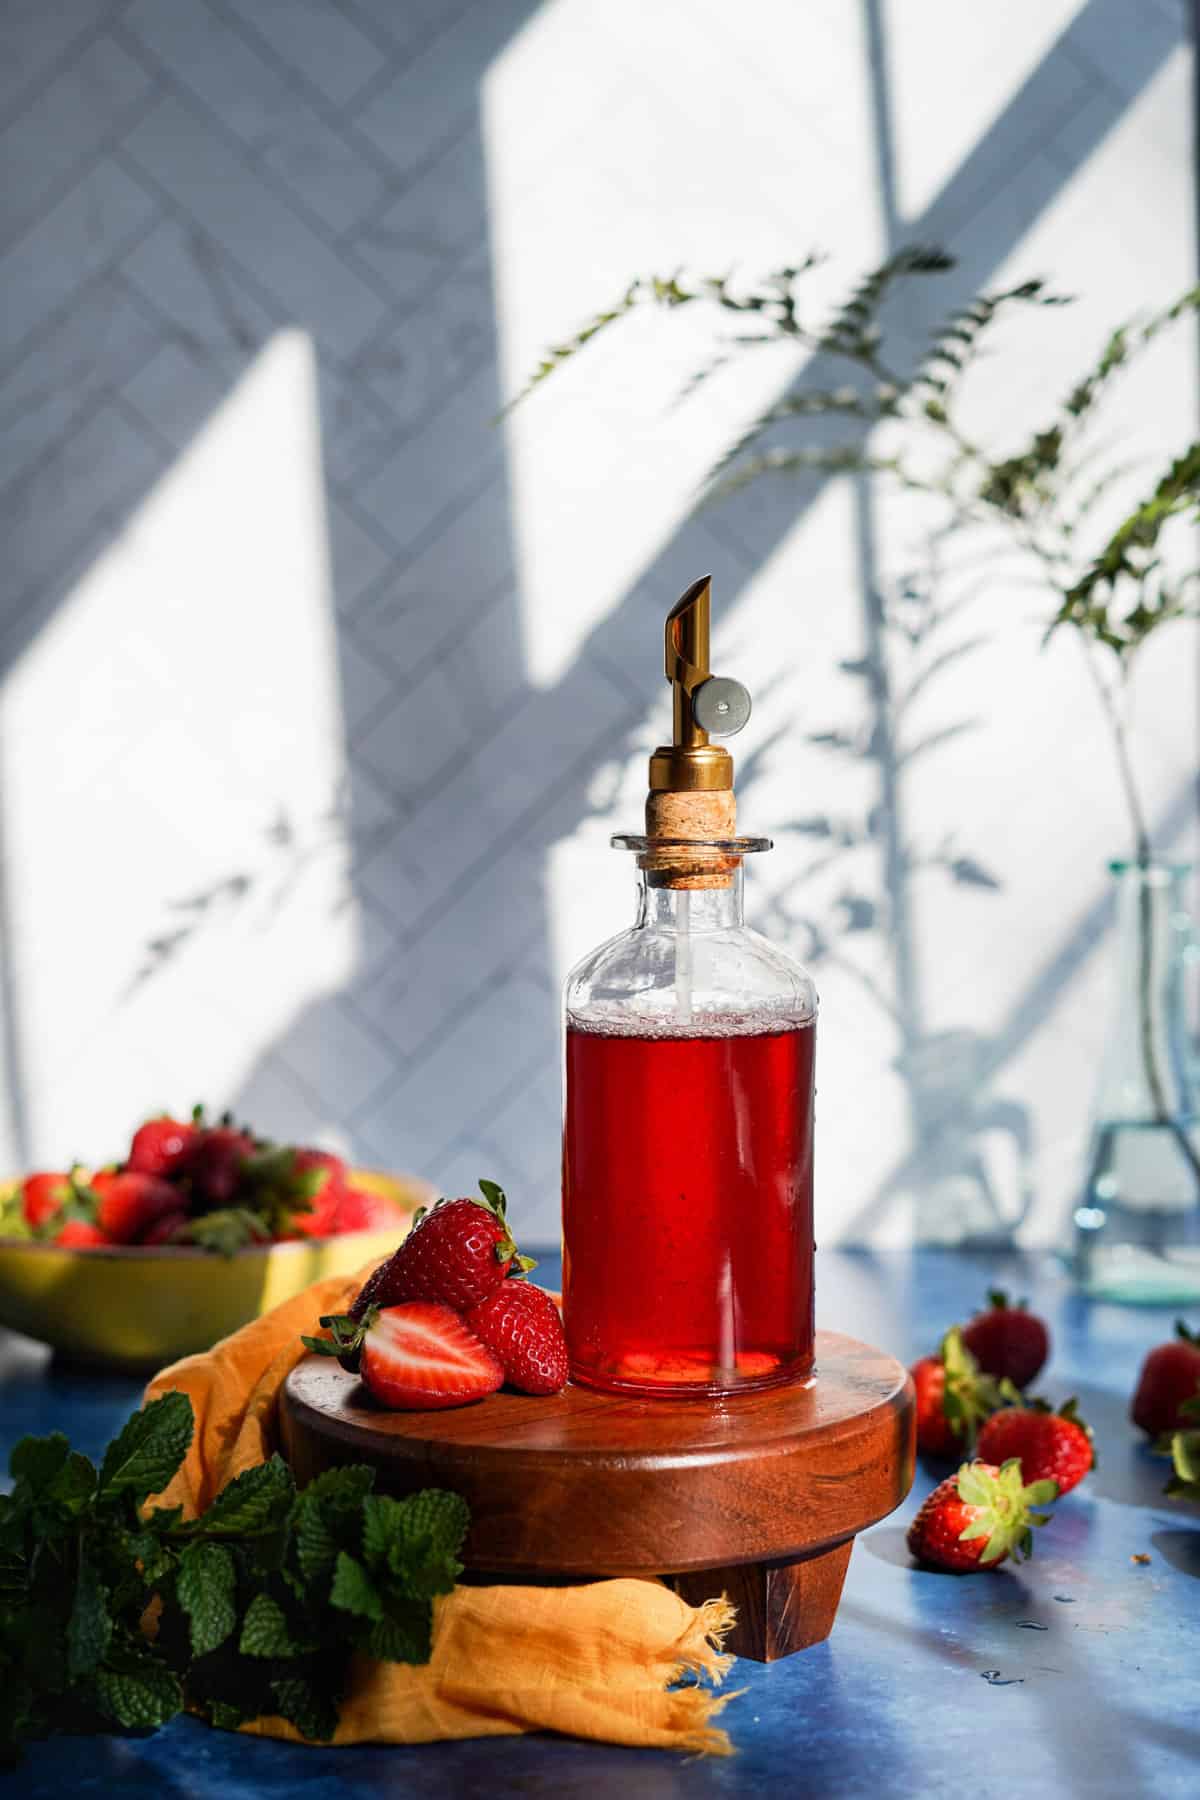 A bottle of strawberry simple syrup sits on a wooden pedestal on a blue countertop. A small pile of strawberries sits next to the bottle.